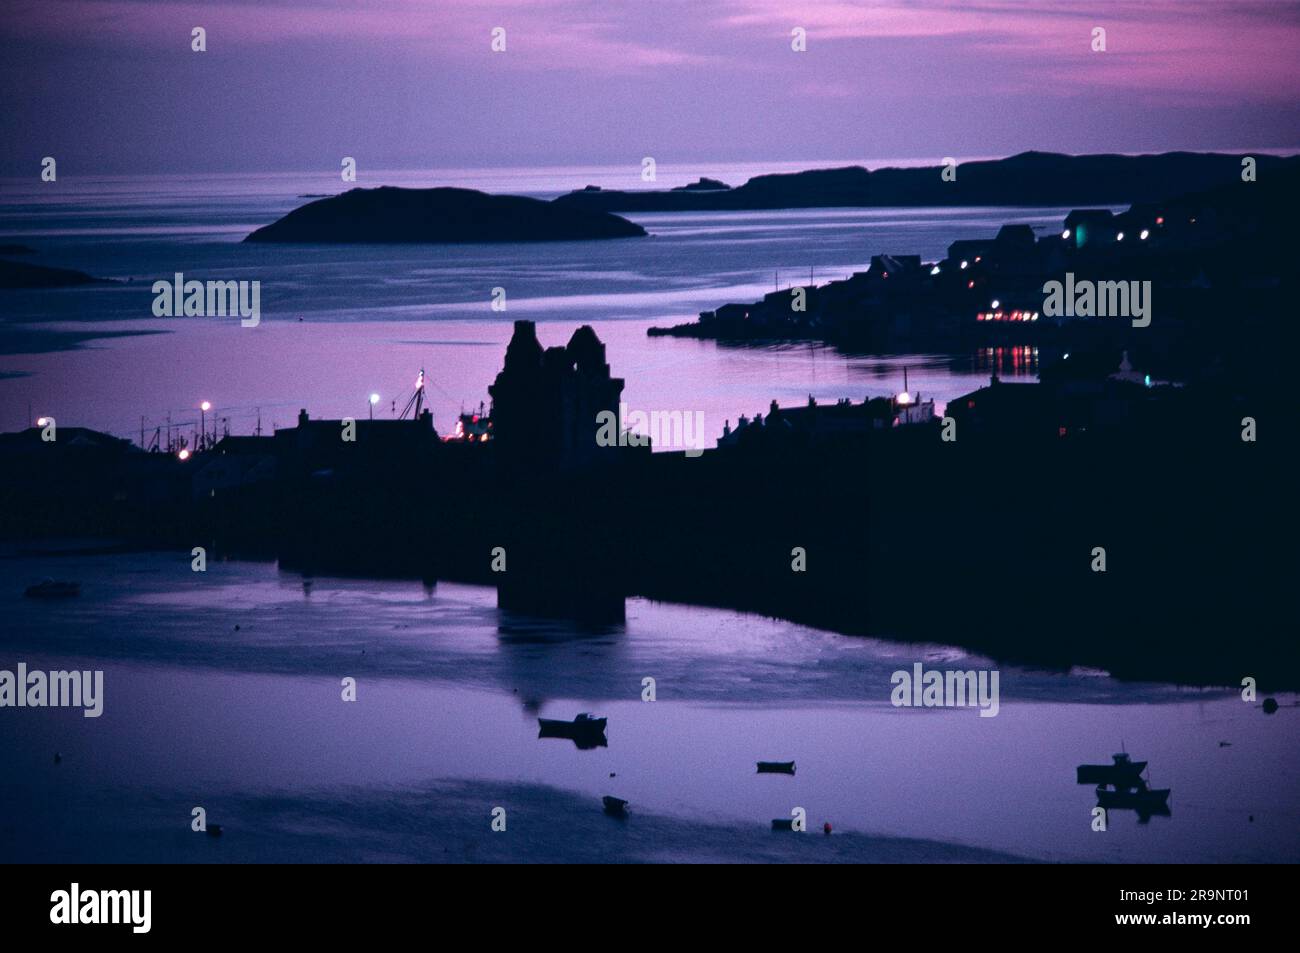 Scalloway, Mainland, Shetland Islands, Scotland circa 1995. The ruined Scalloway Castle at dusk, harbour and small fishing boats in profile. UK 1970S HOMER SYKES Stock Photo